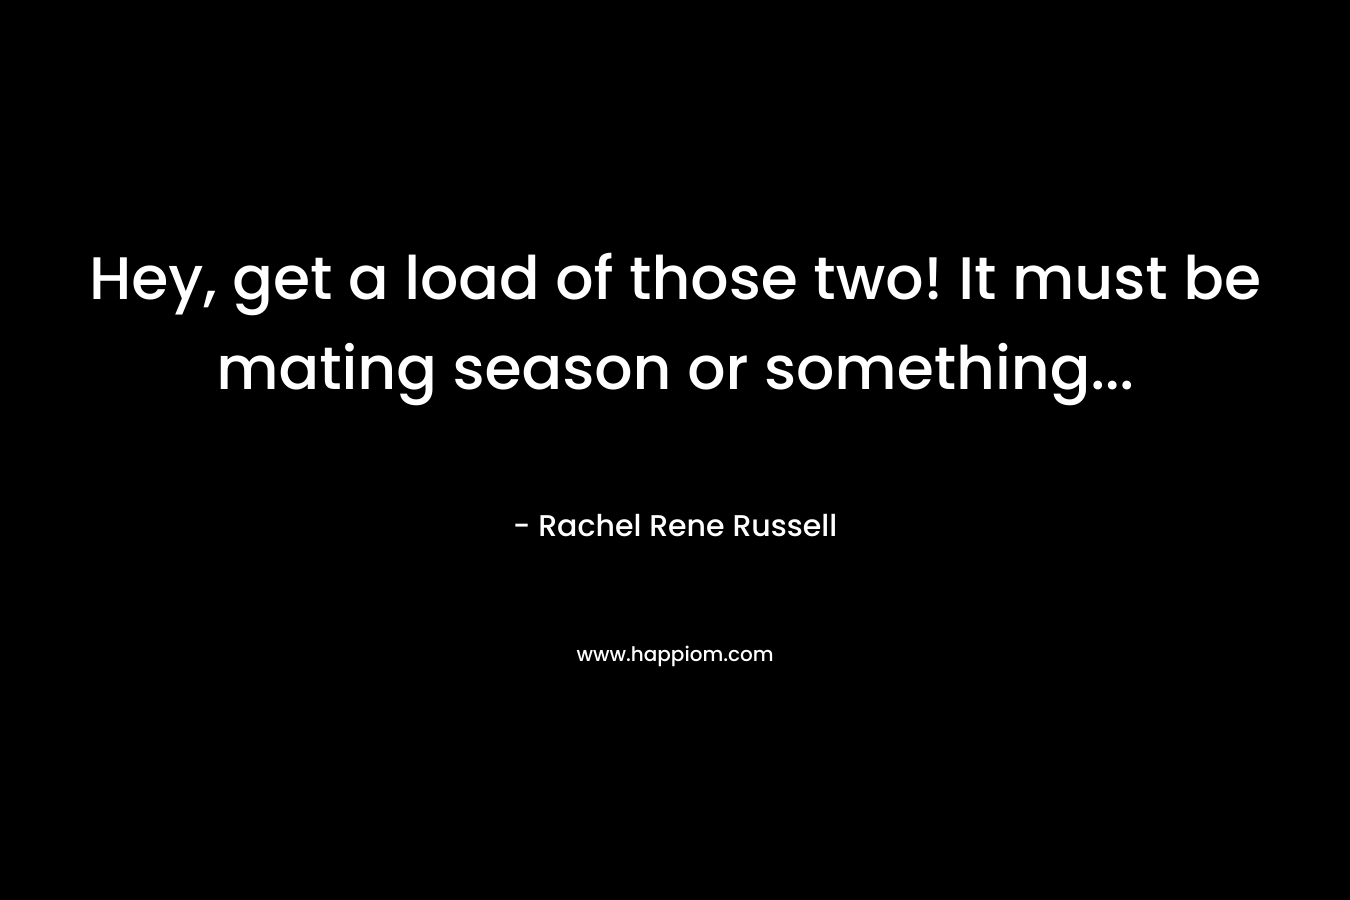 Hey, get a load of those two! It must be mating season or something… – Rachel Rene Russell